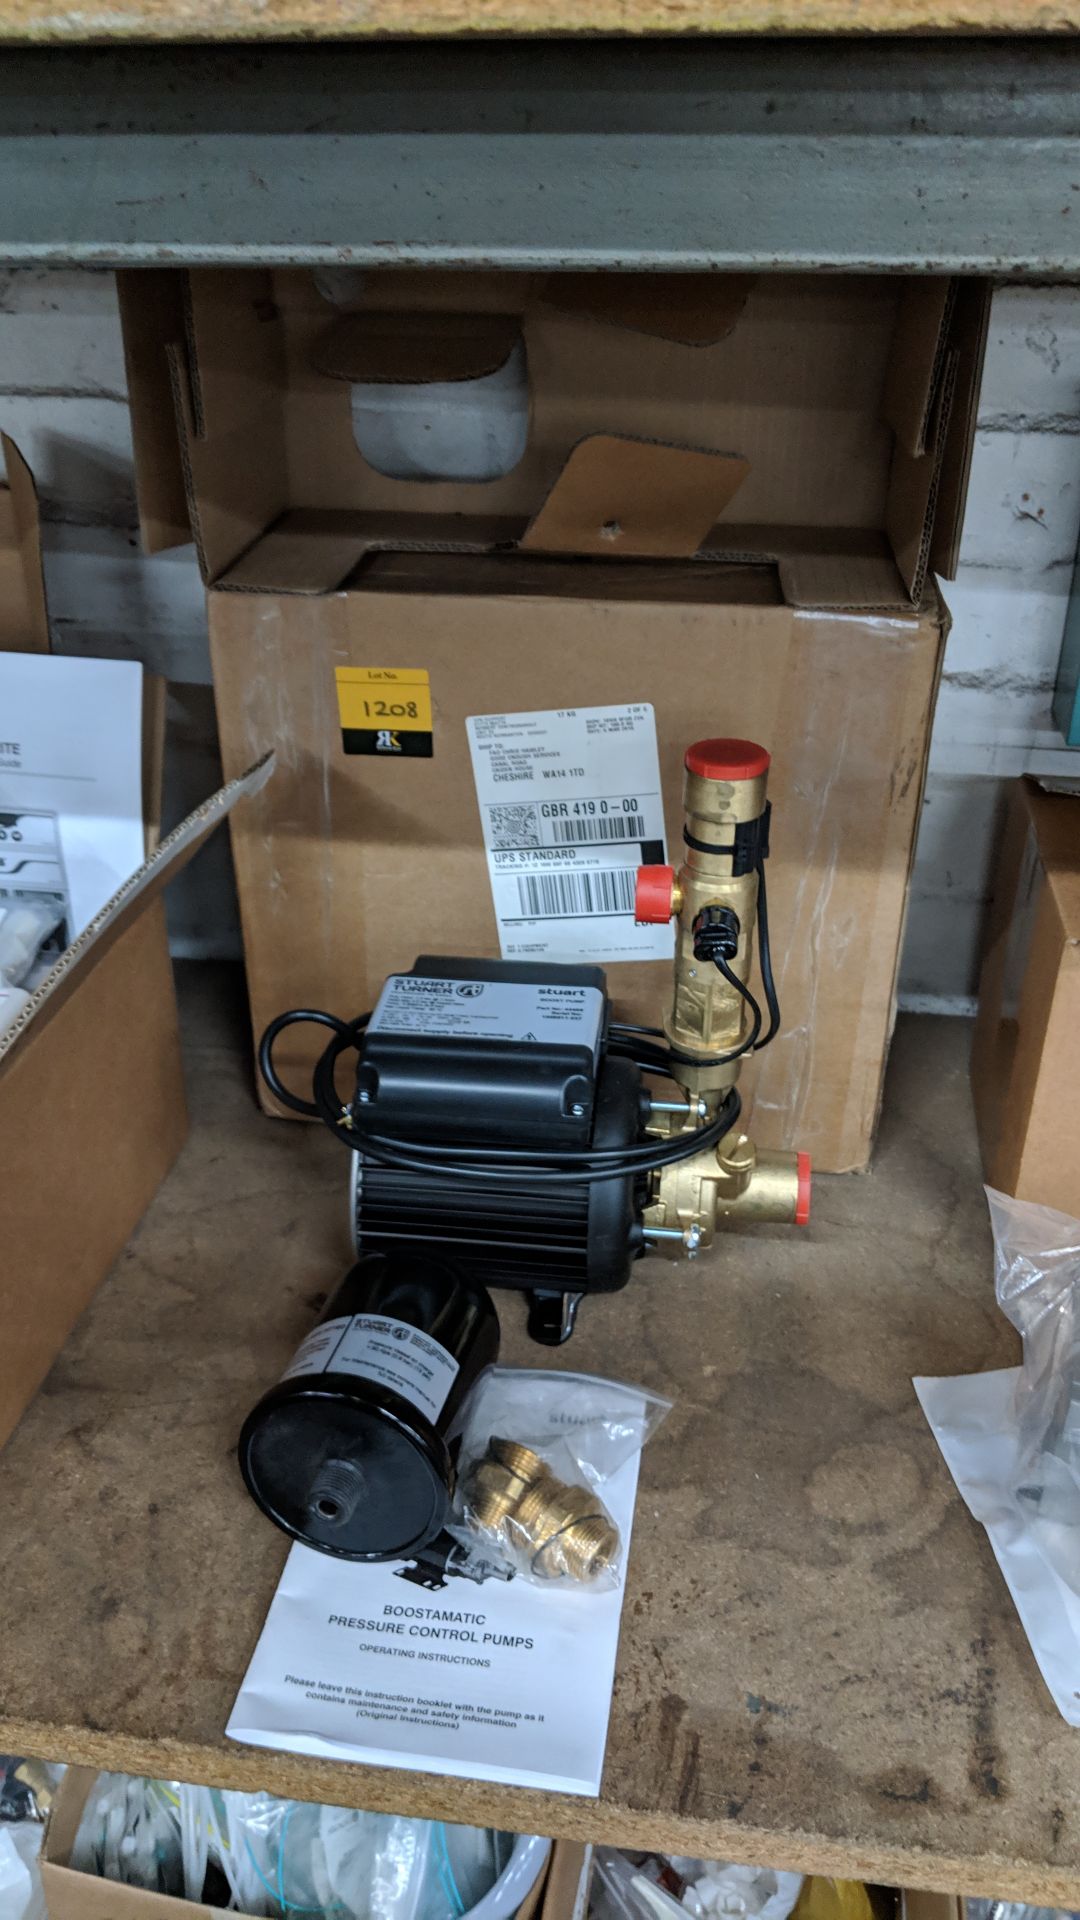 Stuart Turner duty head 2.8 bar shower boost pump This lot is one of a number of lots being sold